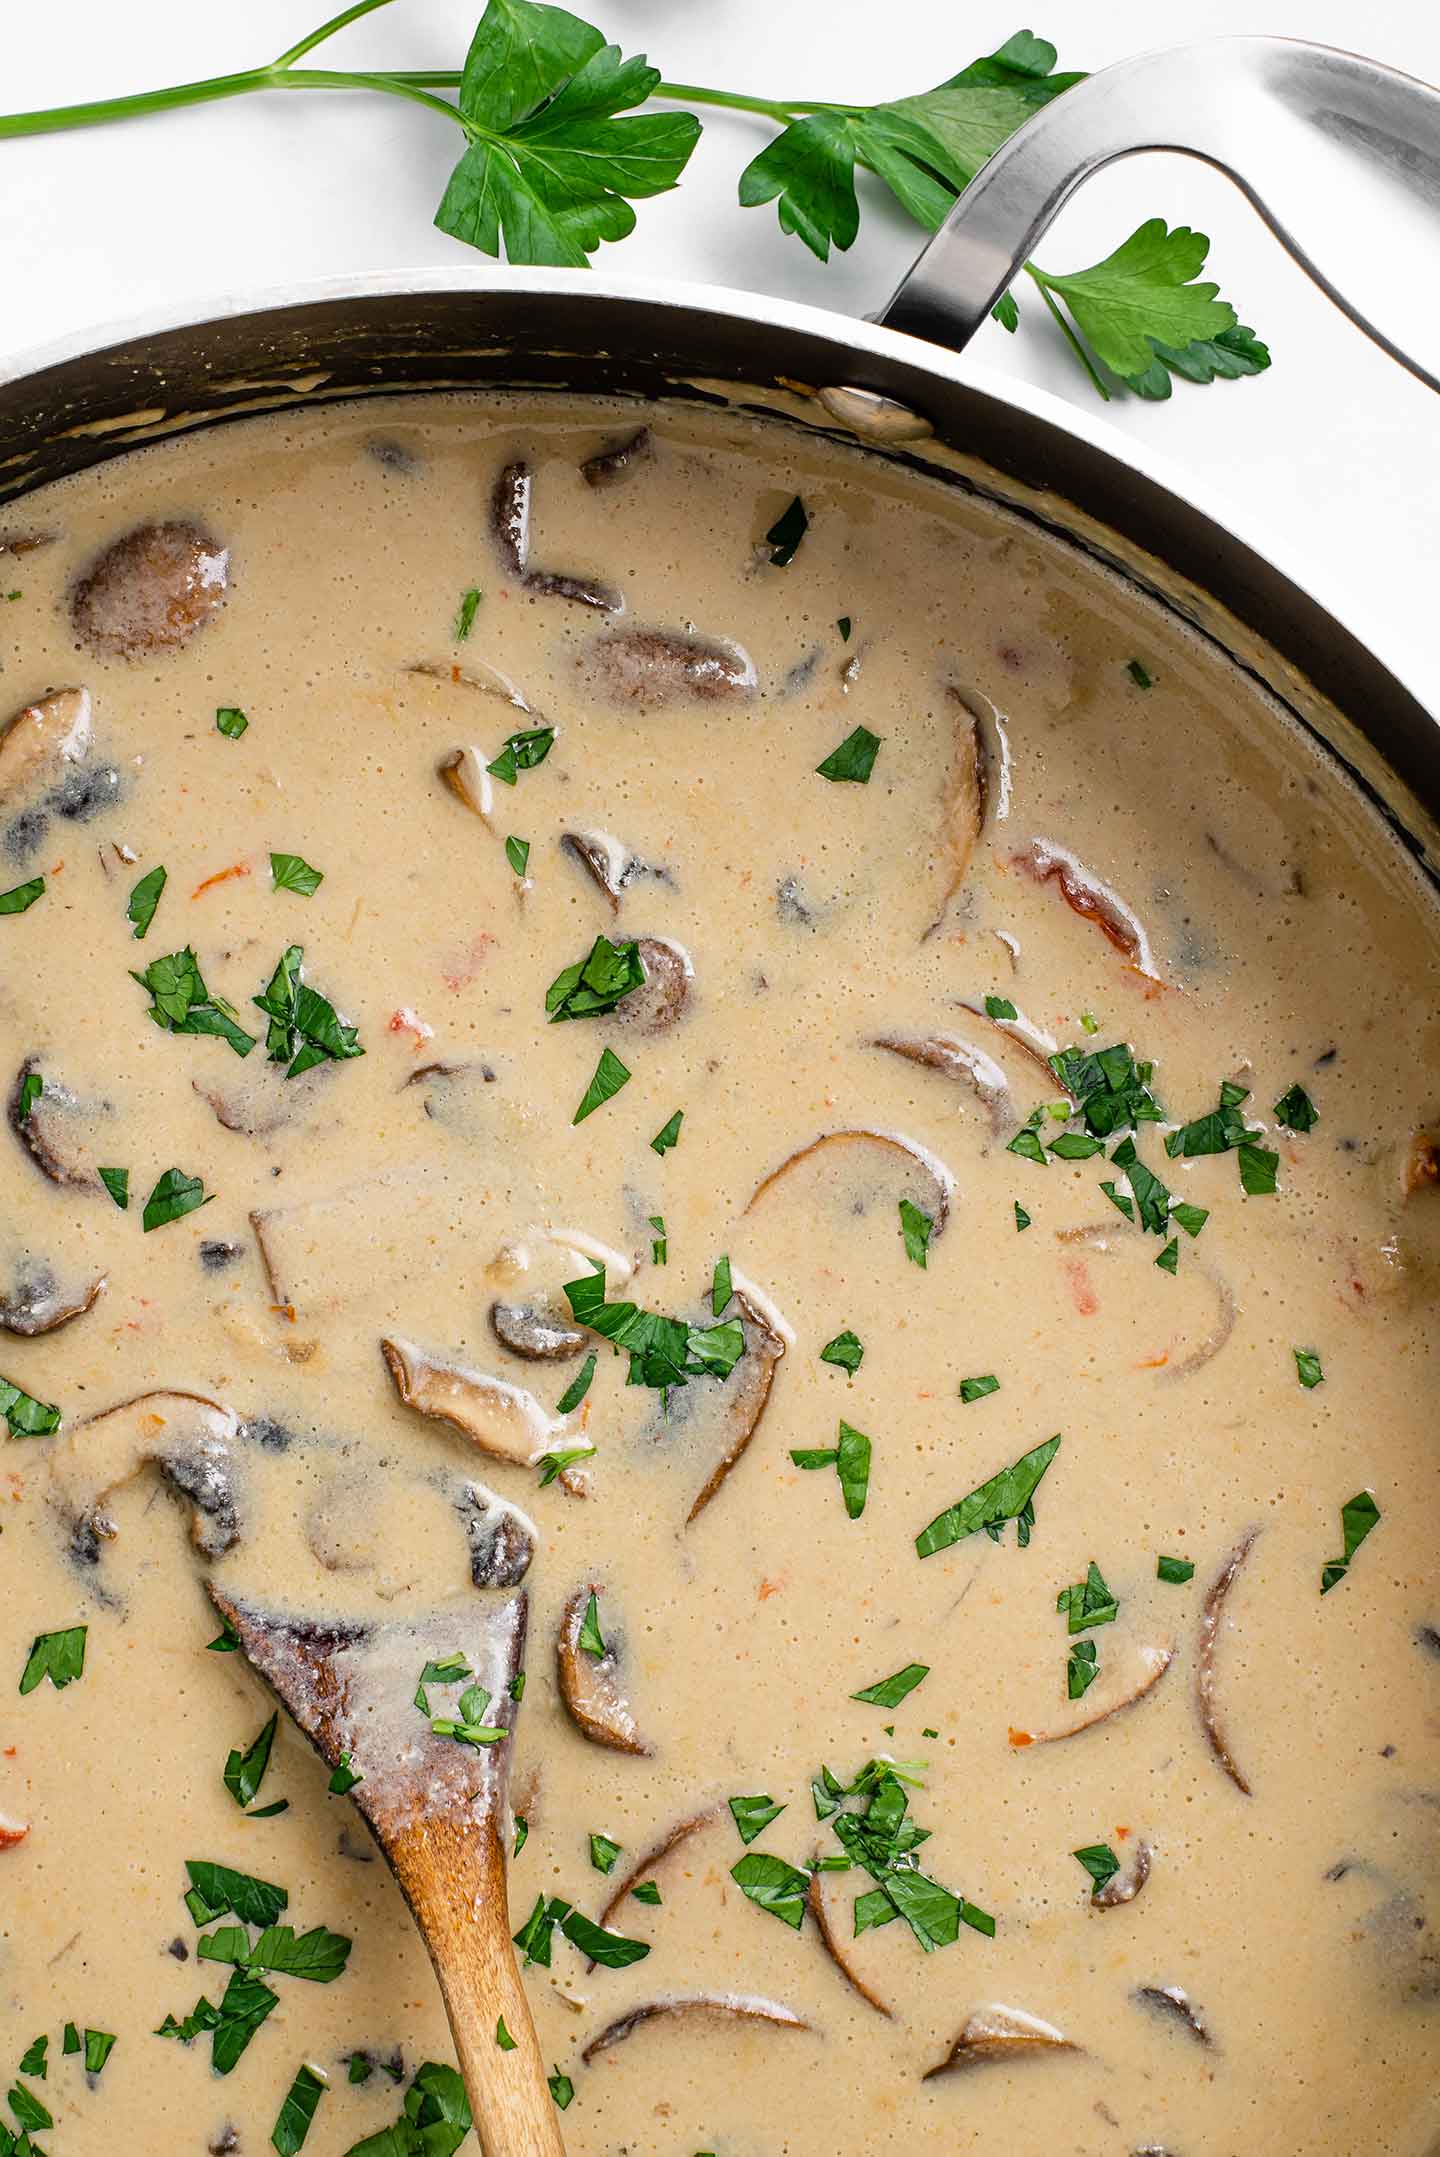 Top down view of the creamy, cost saving stroganoff in a saucepan with a wooden spoon. It is garnished with fresh parsley.